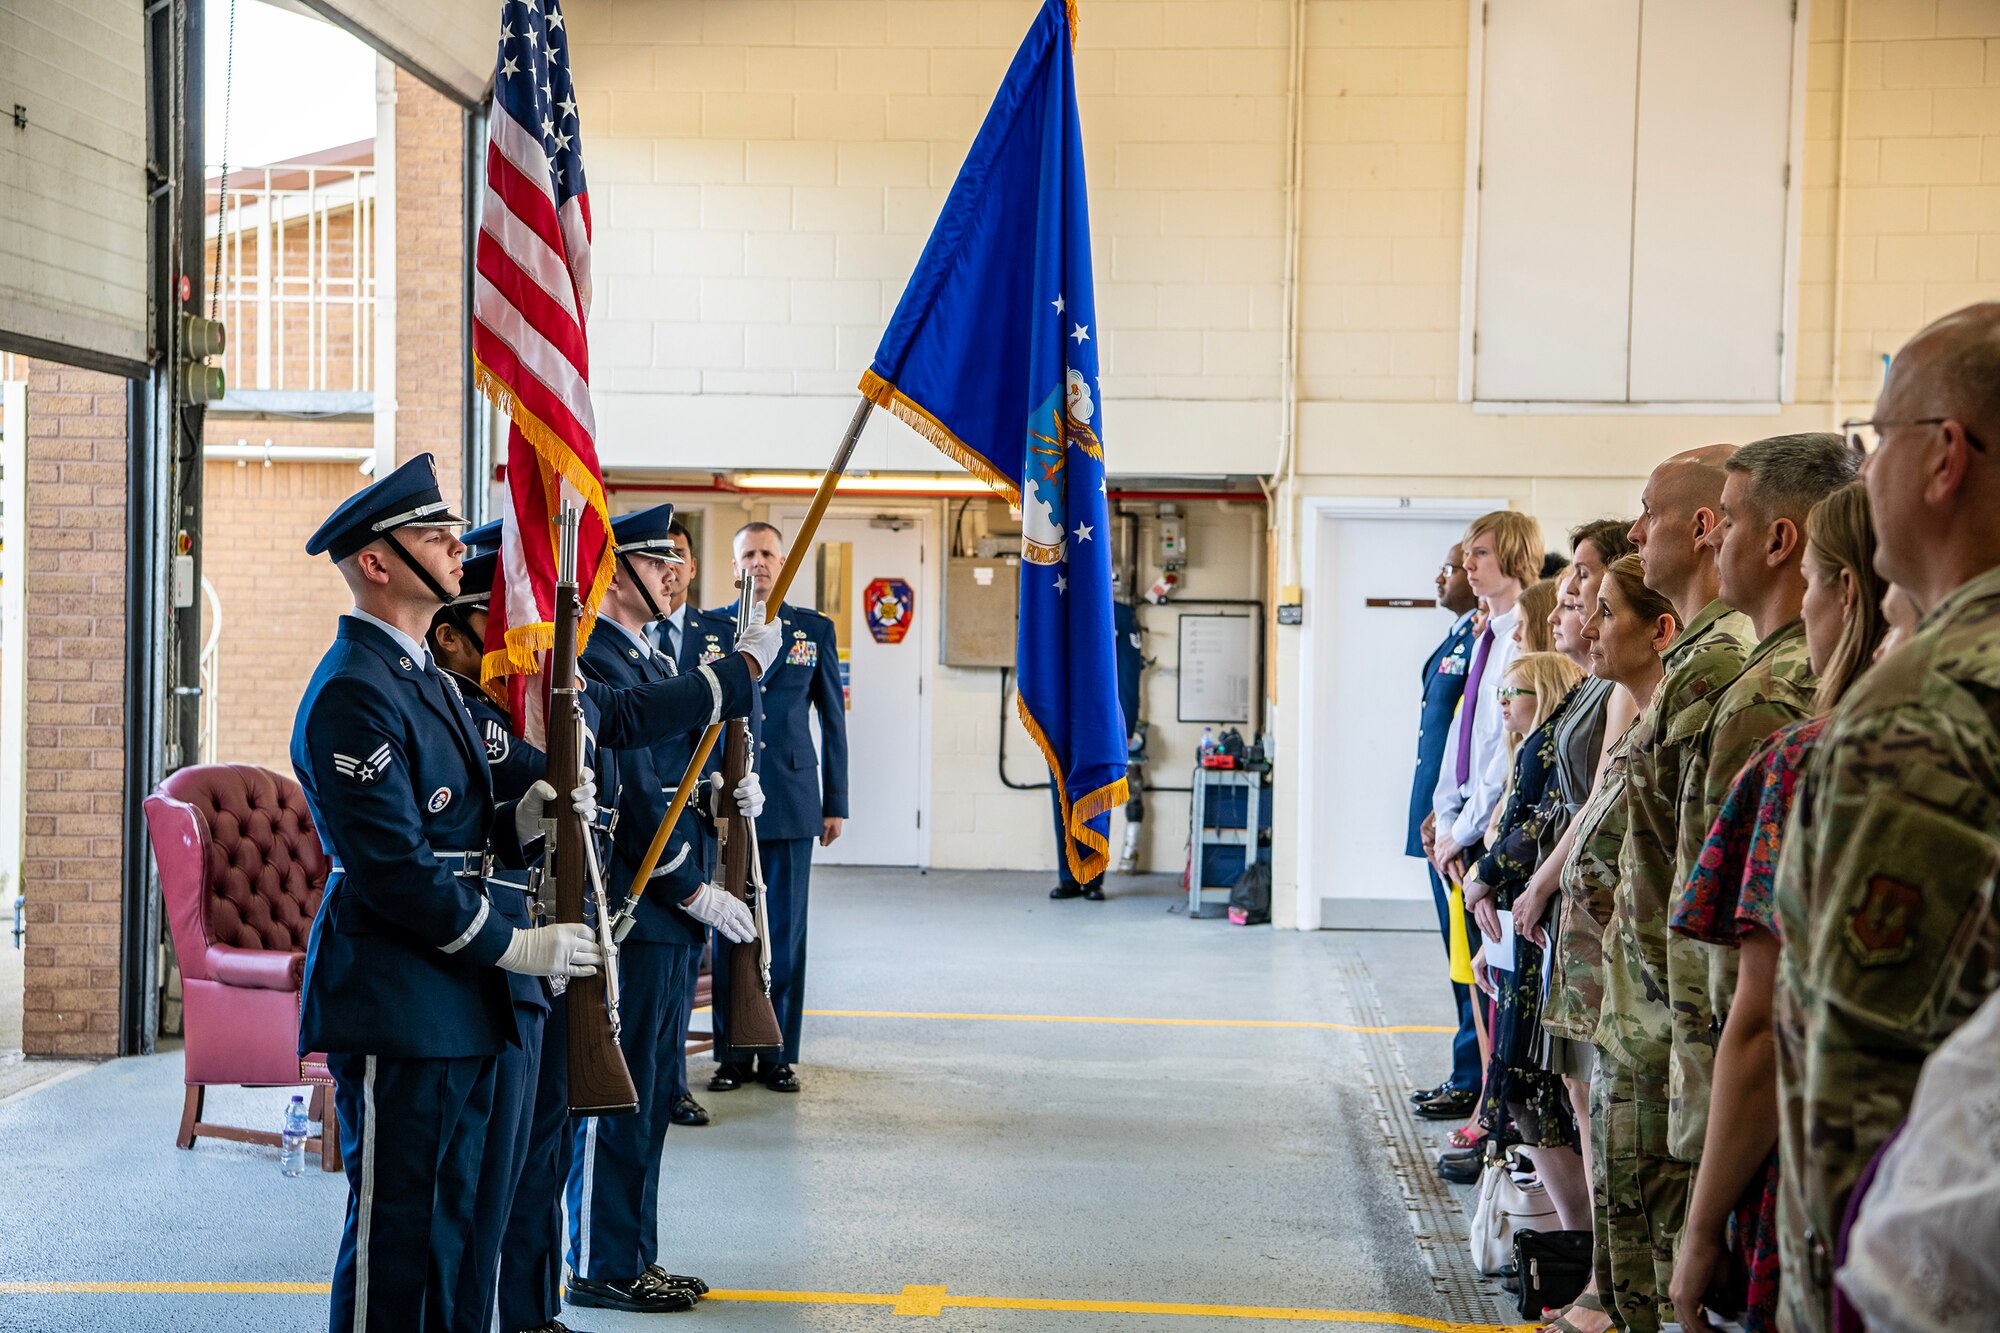 Airmen from the 501st Combat Support Wing stand at attention during a change of command ceremony at RAF Croughton, England, June 15, 2023. Lt. Col. Jethro Sadorra relinquished command of the 422d Civil Engineer Squadron to Maj. Kirk Hull. (U.S. Air Force photo by Staff Sgt. Eugene Oliver)